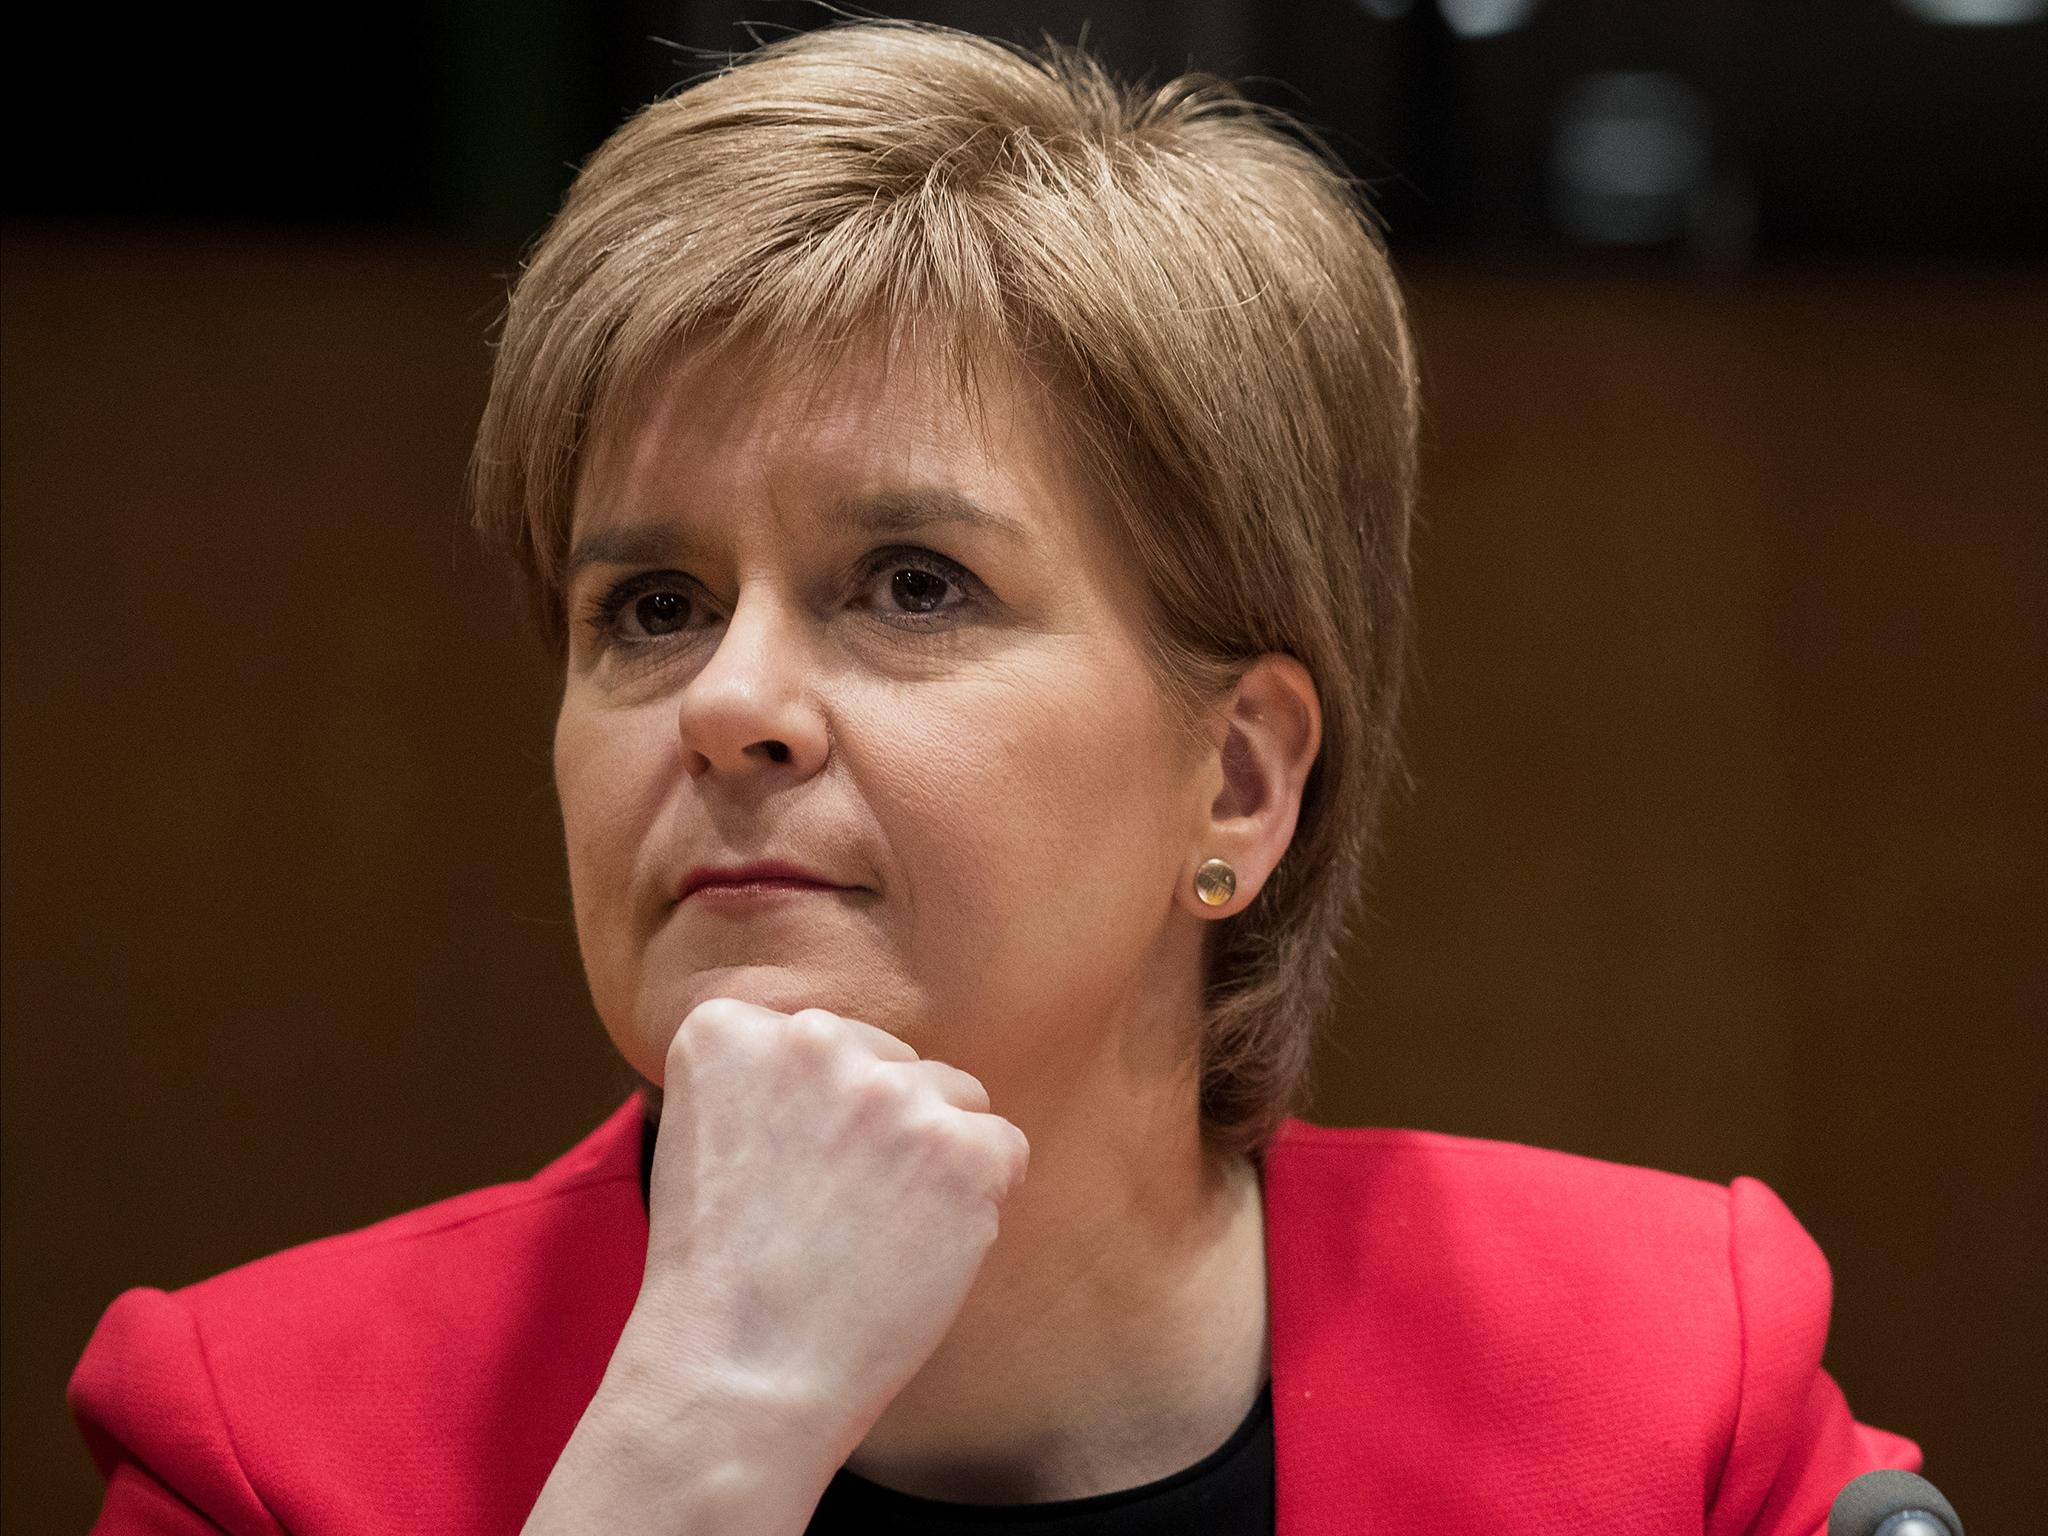 'I was elected as First Minister just less than a year ago. I've got a responsibility to lead this country,' says First Minister